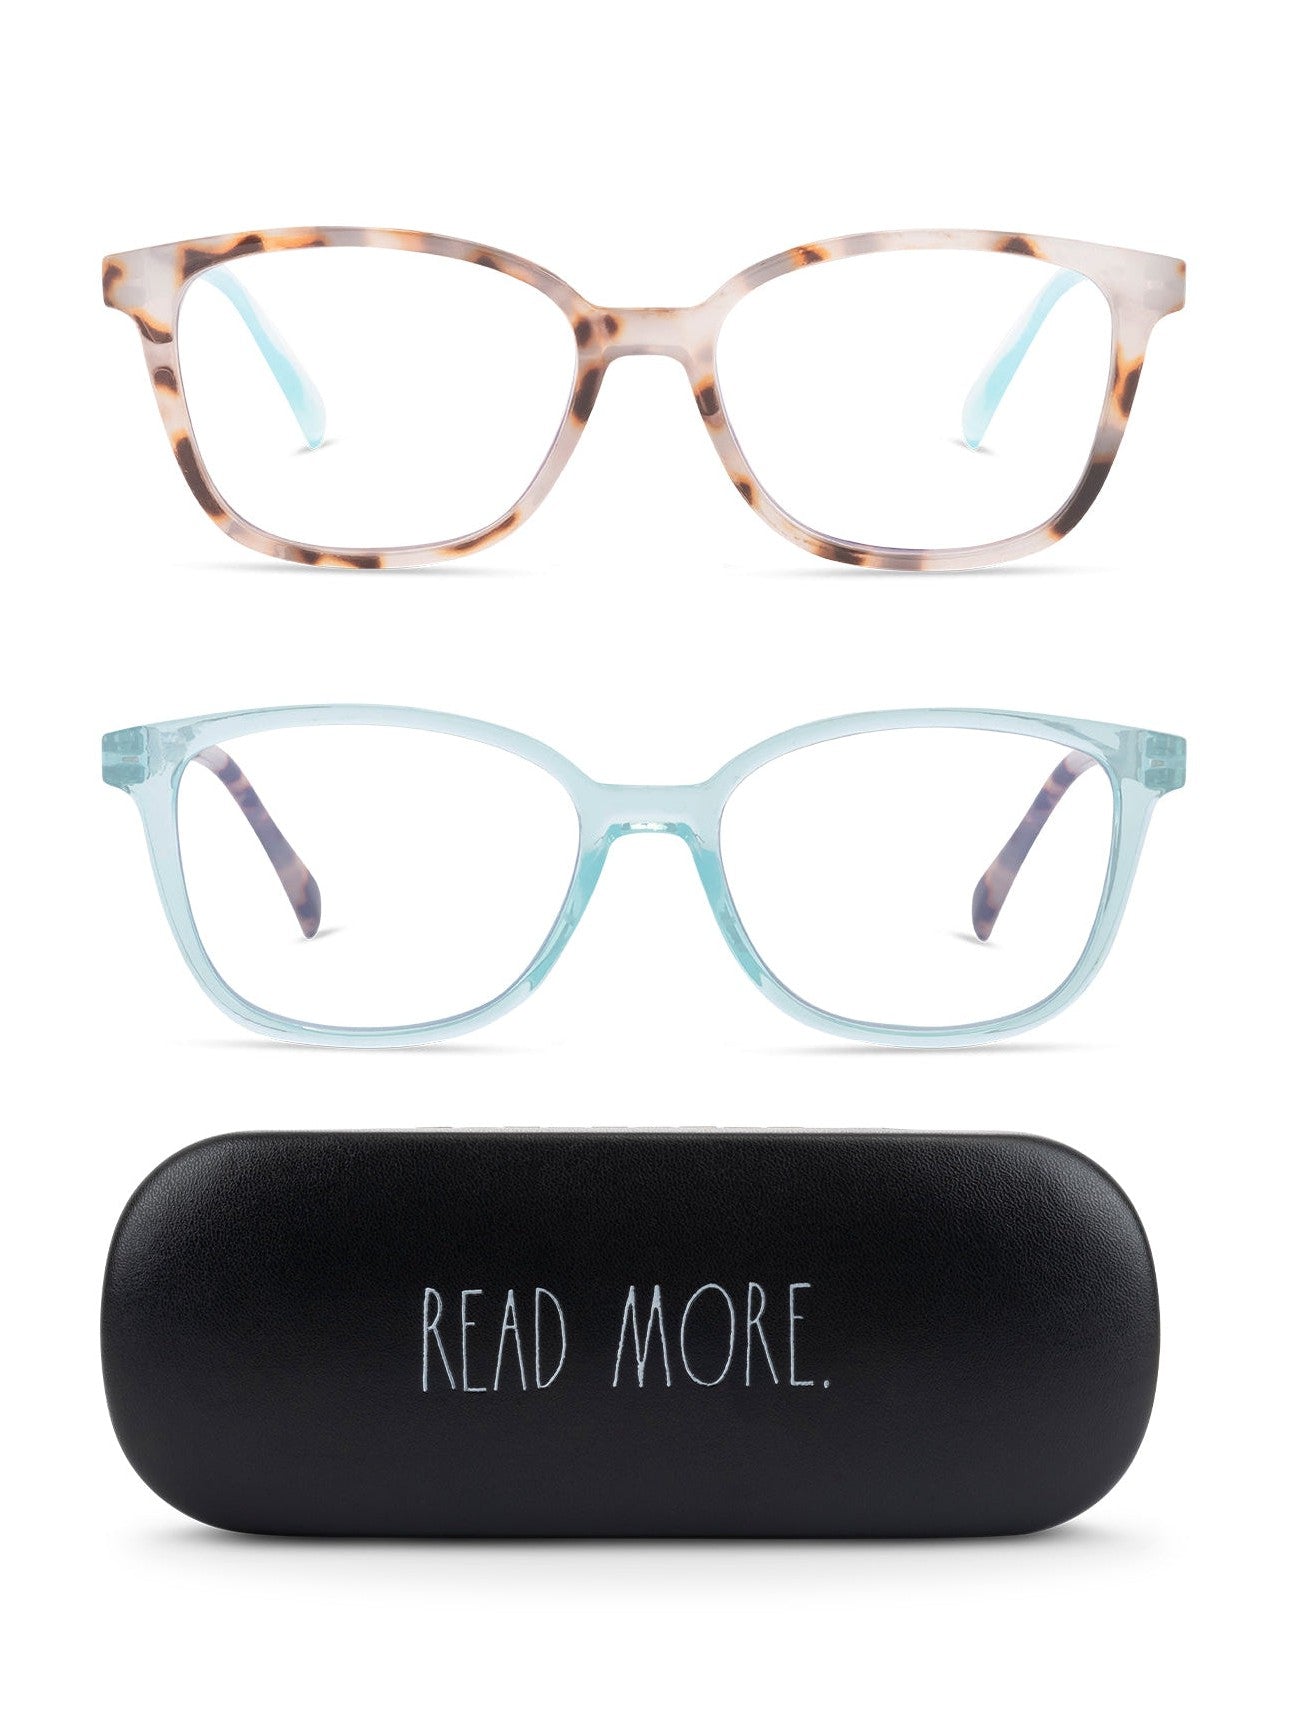 NALA 2-Pack Blue Light Blocking Reading Glasses with "READ MORE" Signature Font Hard Case - Rae Dunn Wear